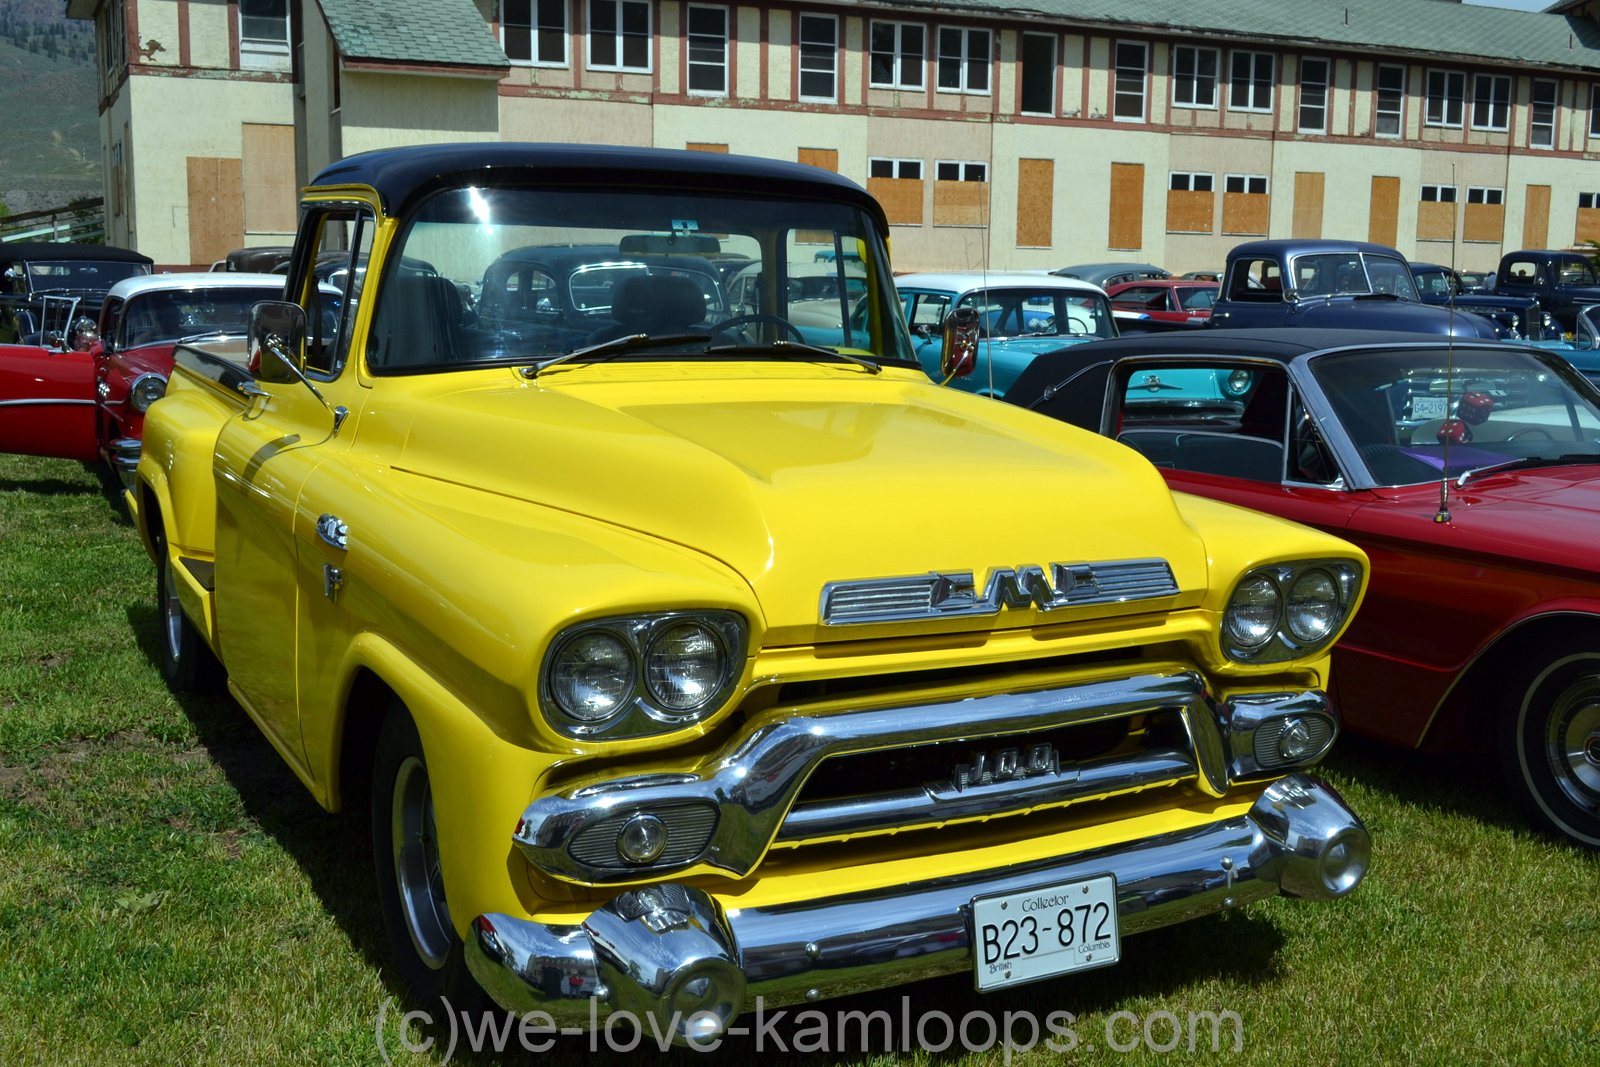 This bright yellow truck stands out in the crowd